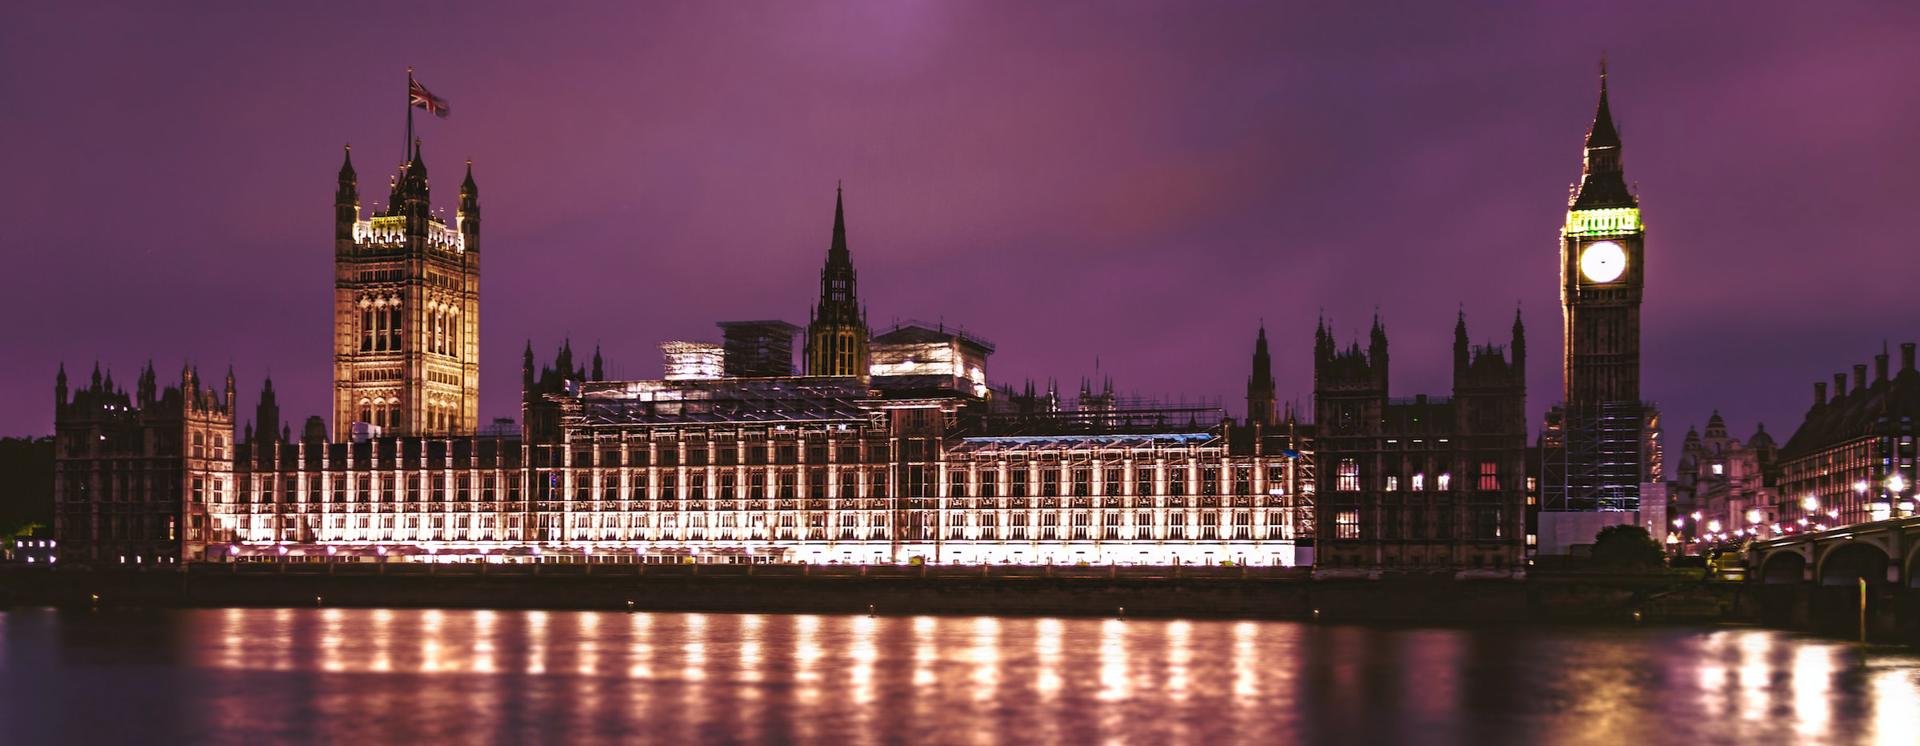 View of the Houses of Parliament at dusk from across the Thames